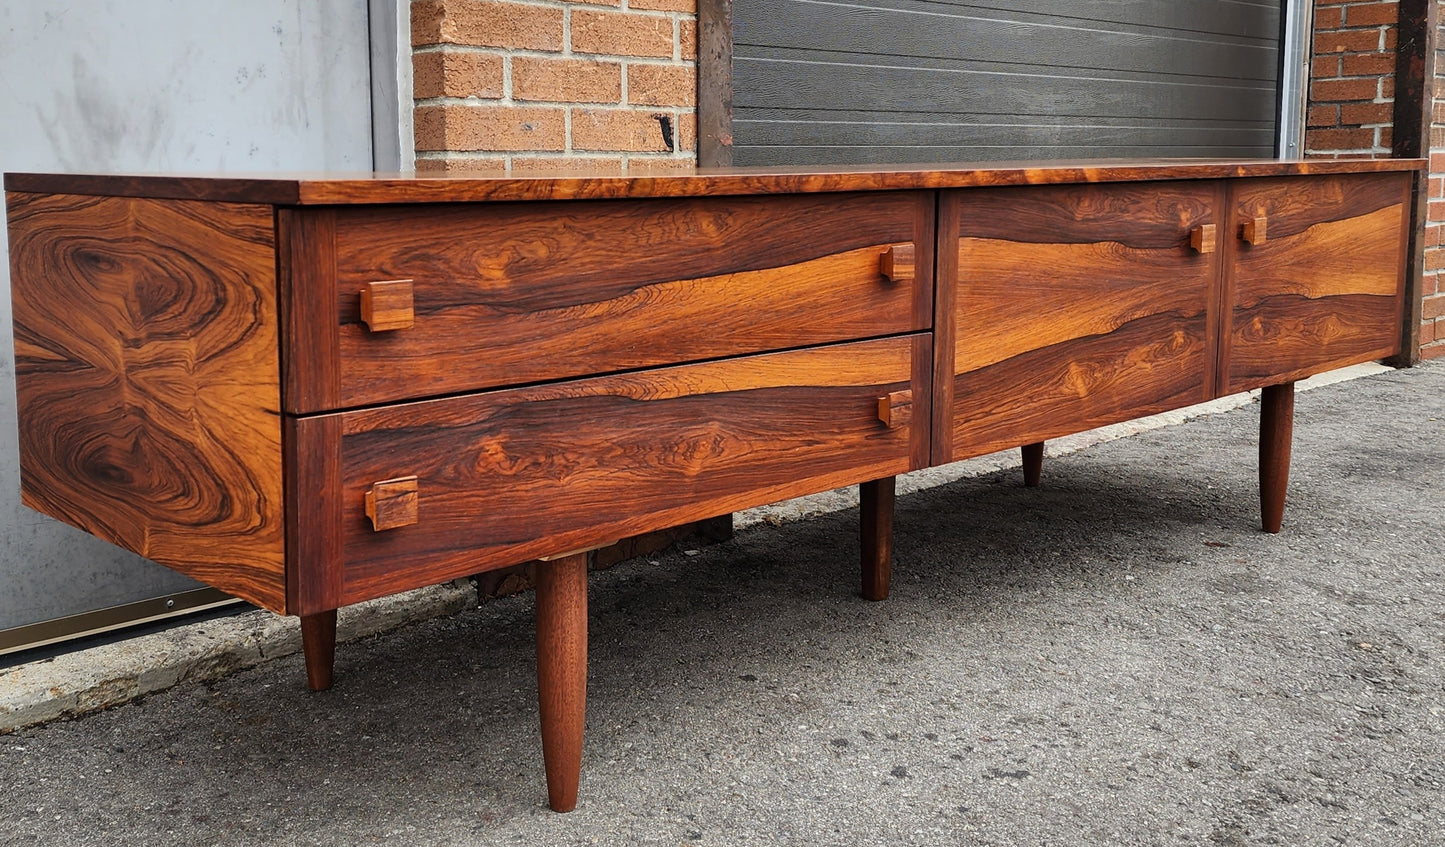 REFINISHED Danish Mid Century Modern Rosewood Console 86"wide & low